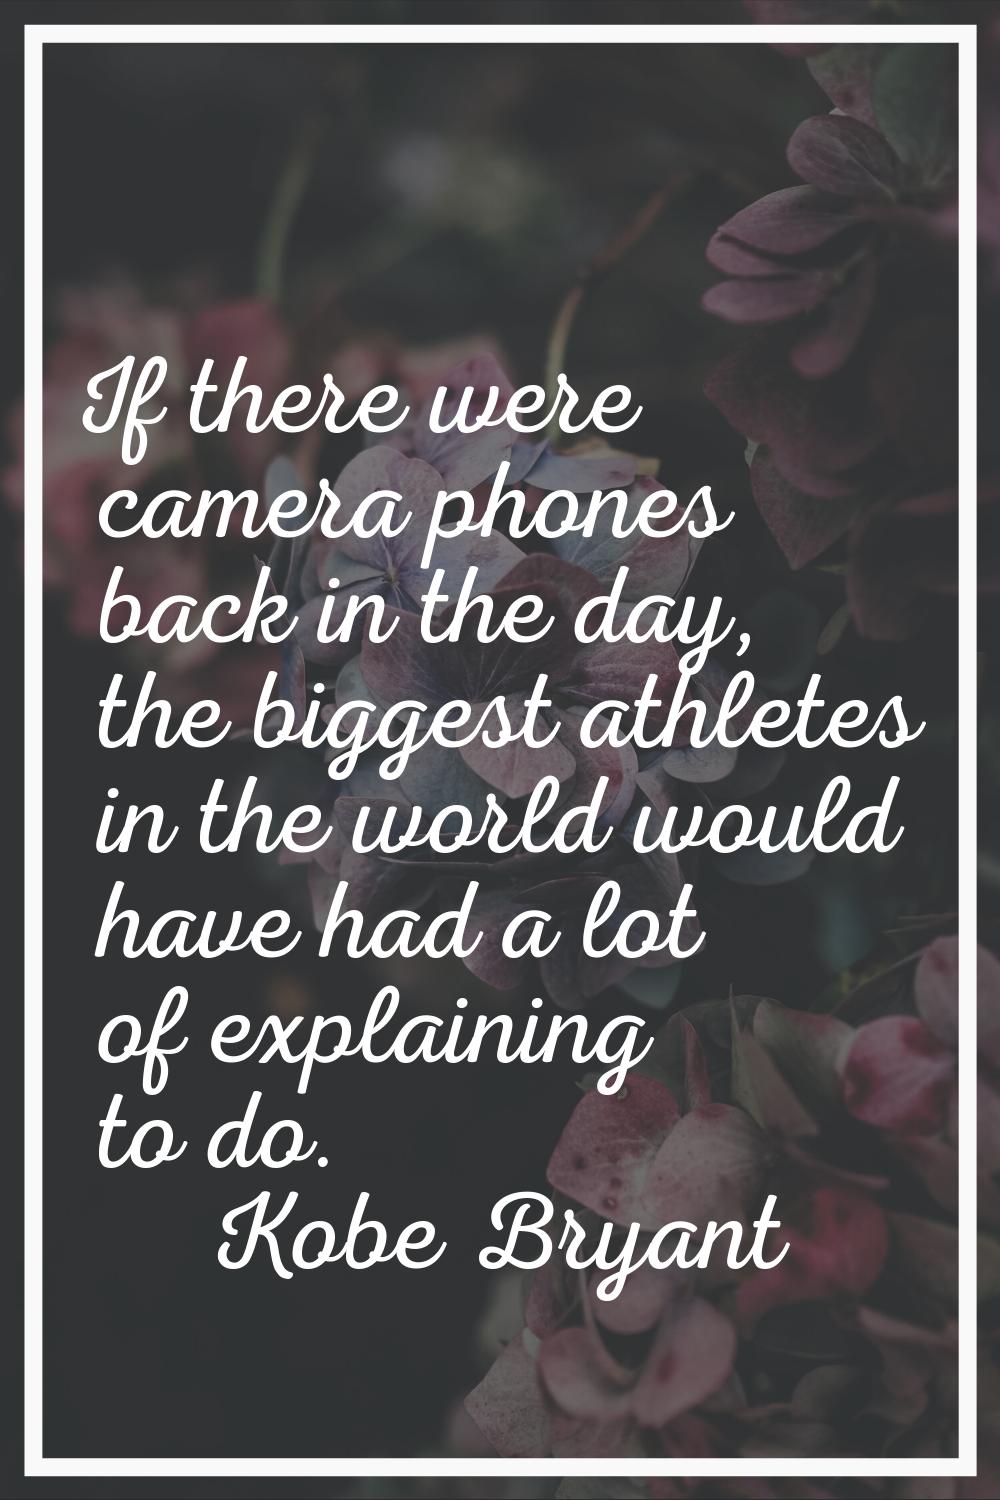 If there were camera phones back in the day, the biggest athletes in the world would have had a lot